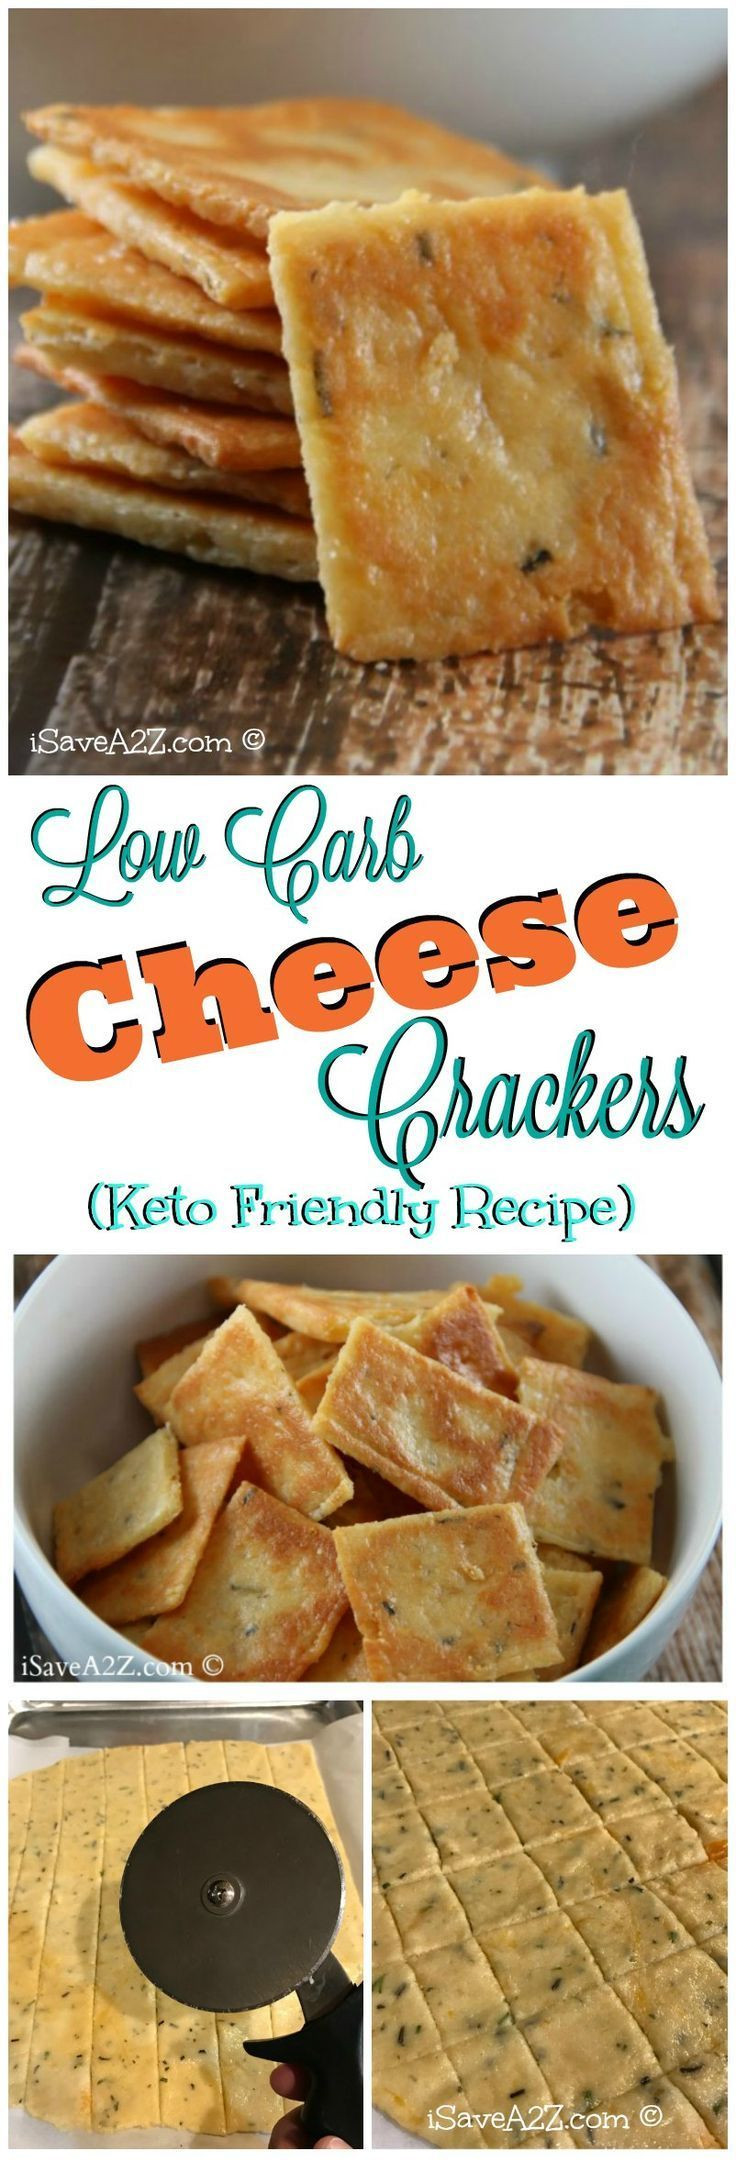 Low Carb Chips And Crackers
 Best 25 Keto foods ideas on Pinterest